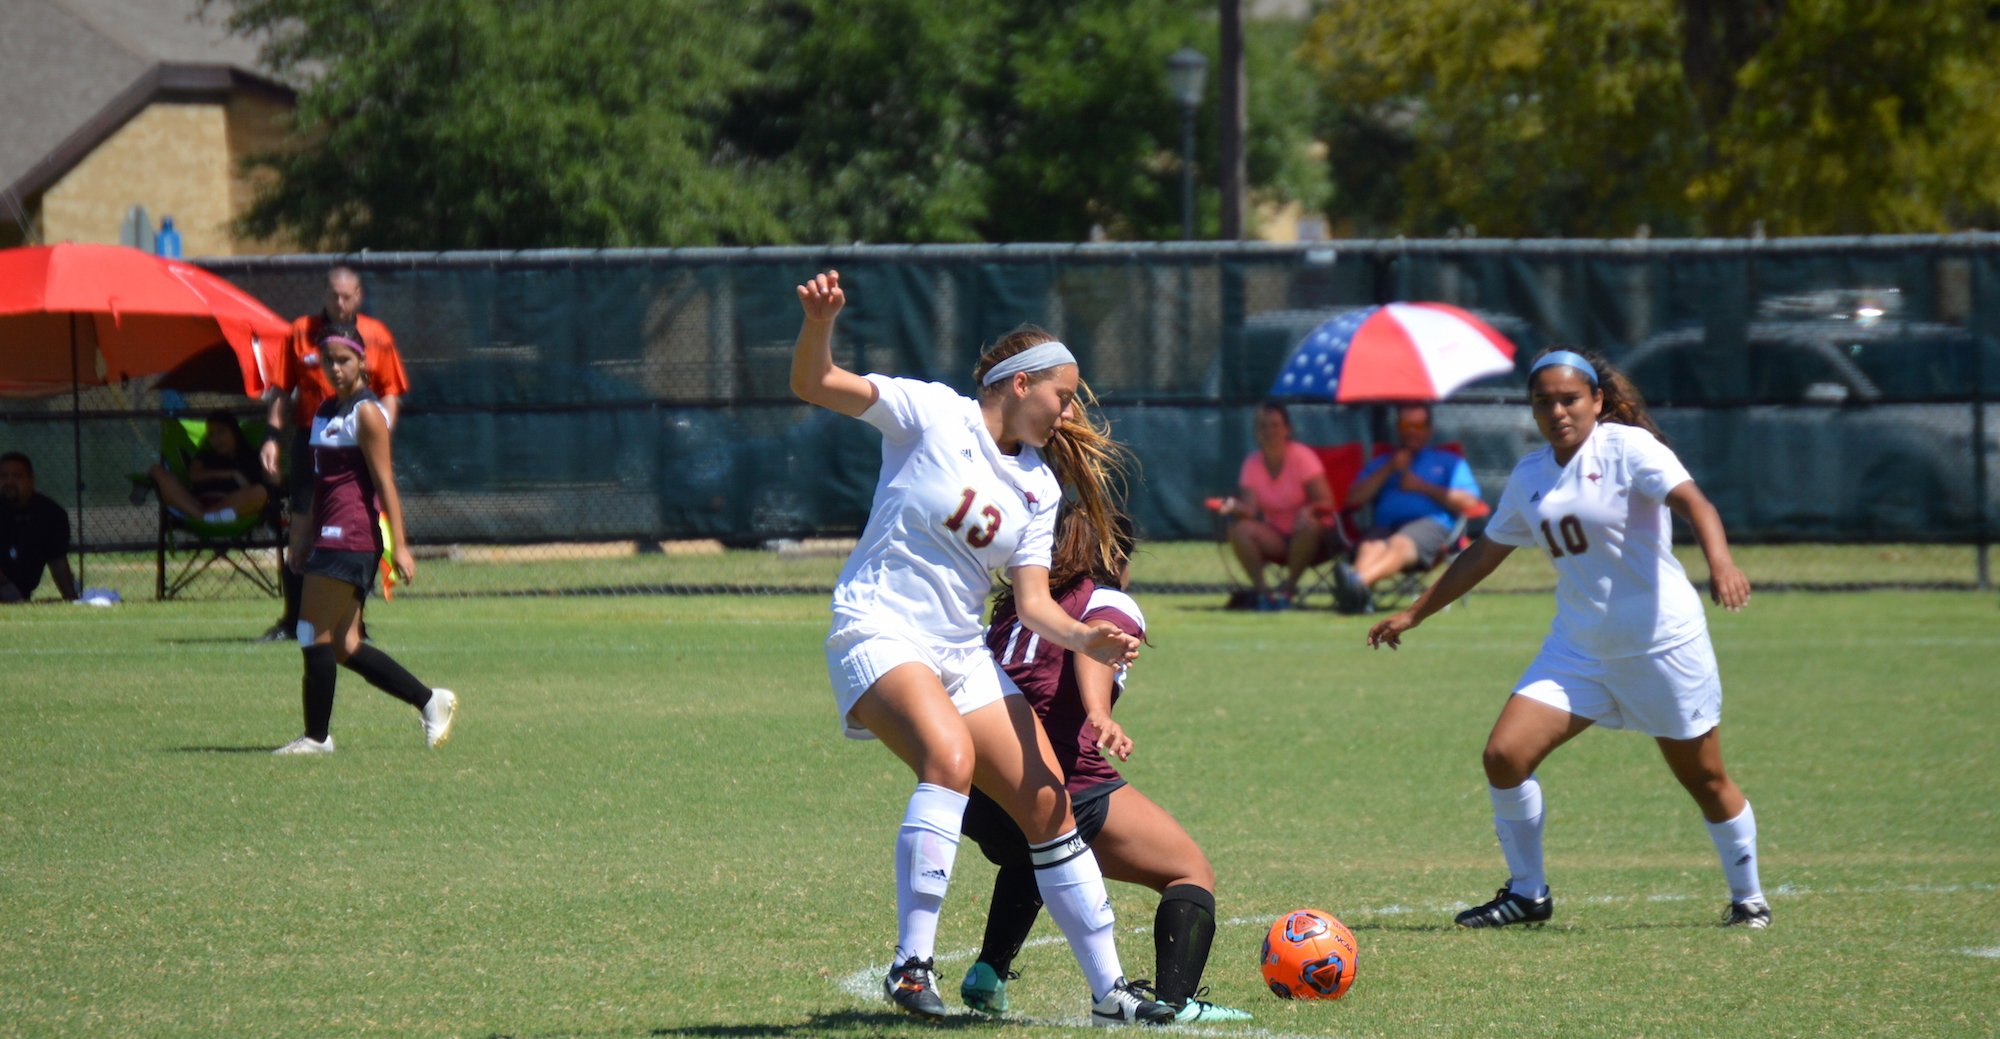 'Roos Fall to Schreiner 2-0